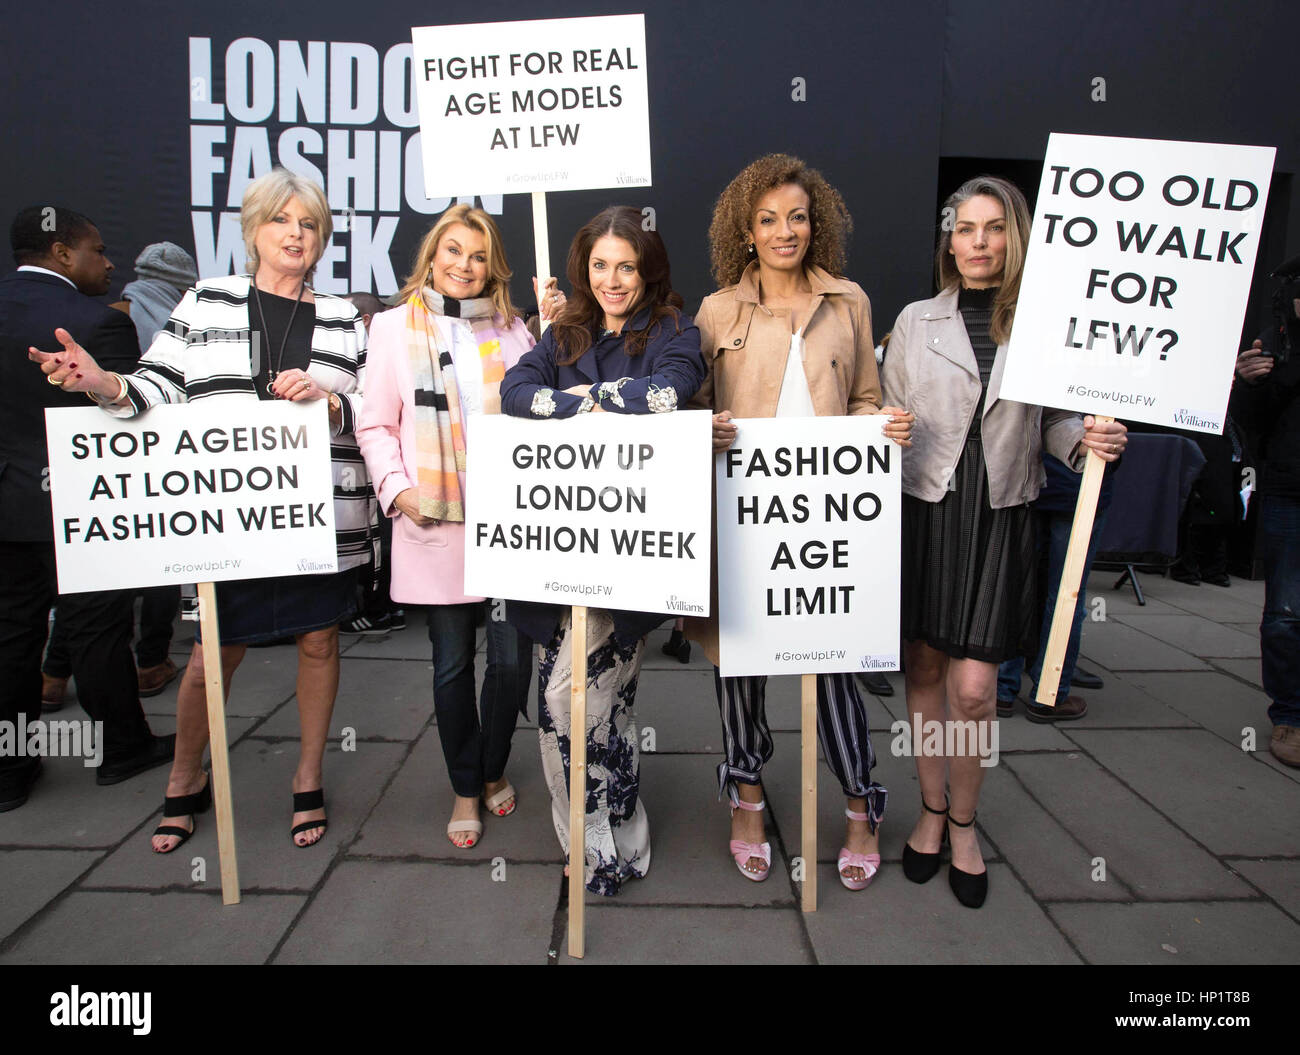 EDITORIAL USE ONLY (Left to right) Janie Felstead, 65, Jilly Johnson, 63, Gina Michel, Brucella Newman-Persaud and Liz Horne, take part in a mature models protest on the Strand in London, as retailer JD Williams demonstrates against ageism at London Fashion Week. Stock Photo